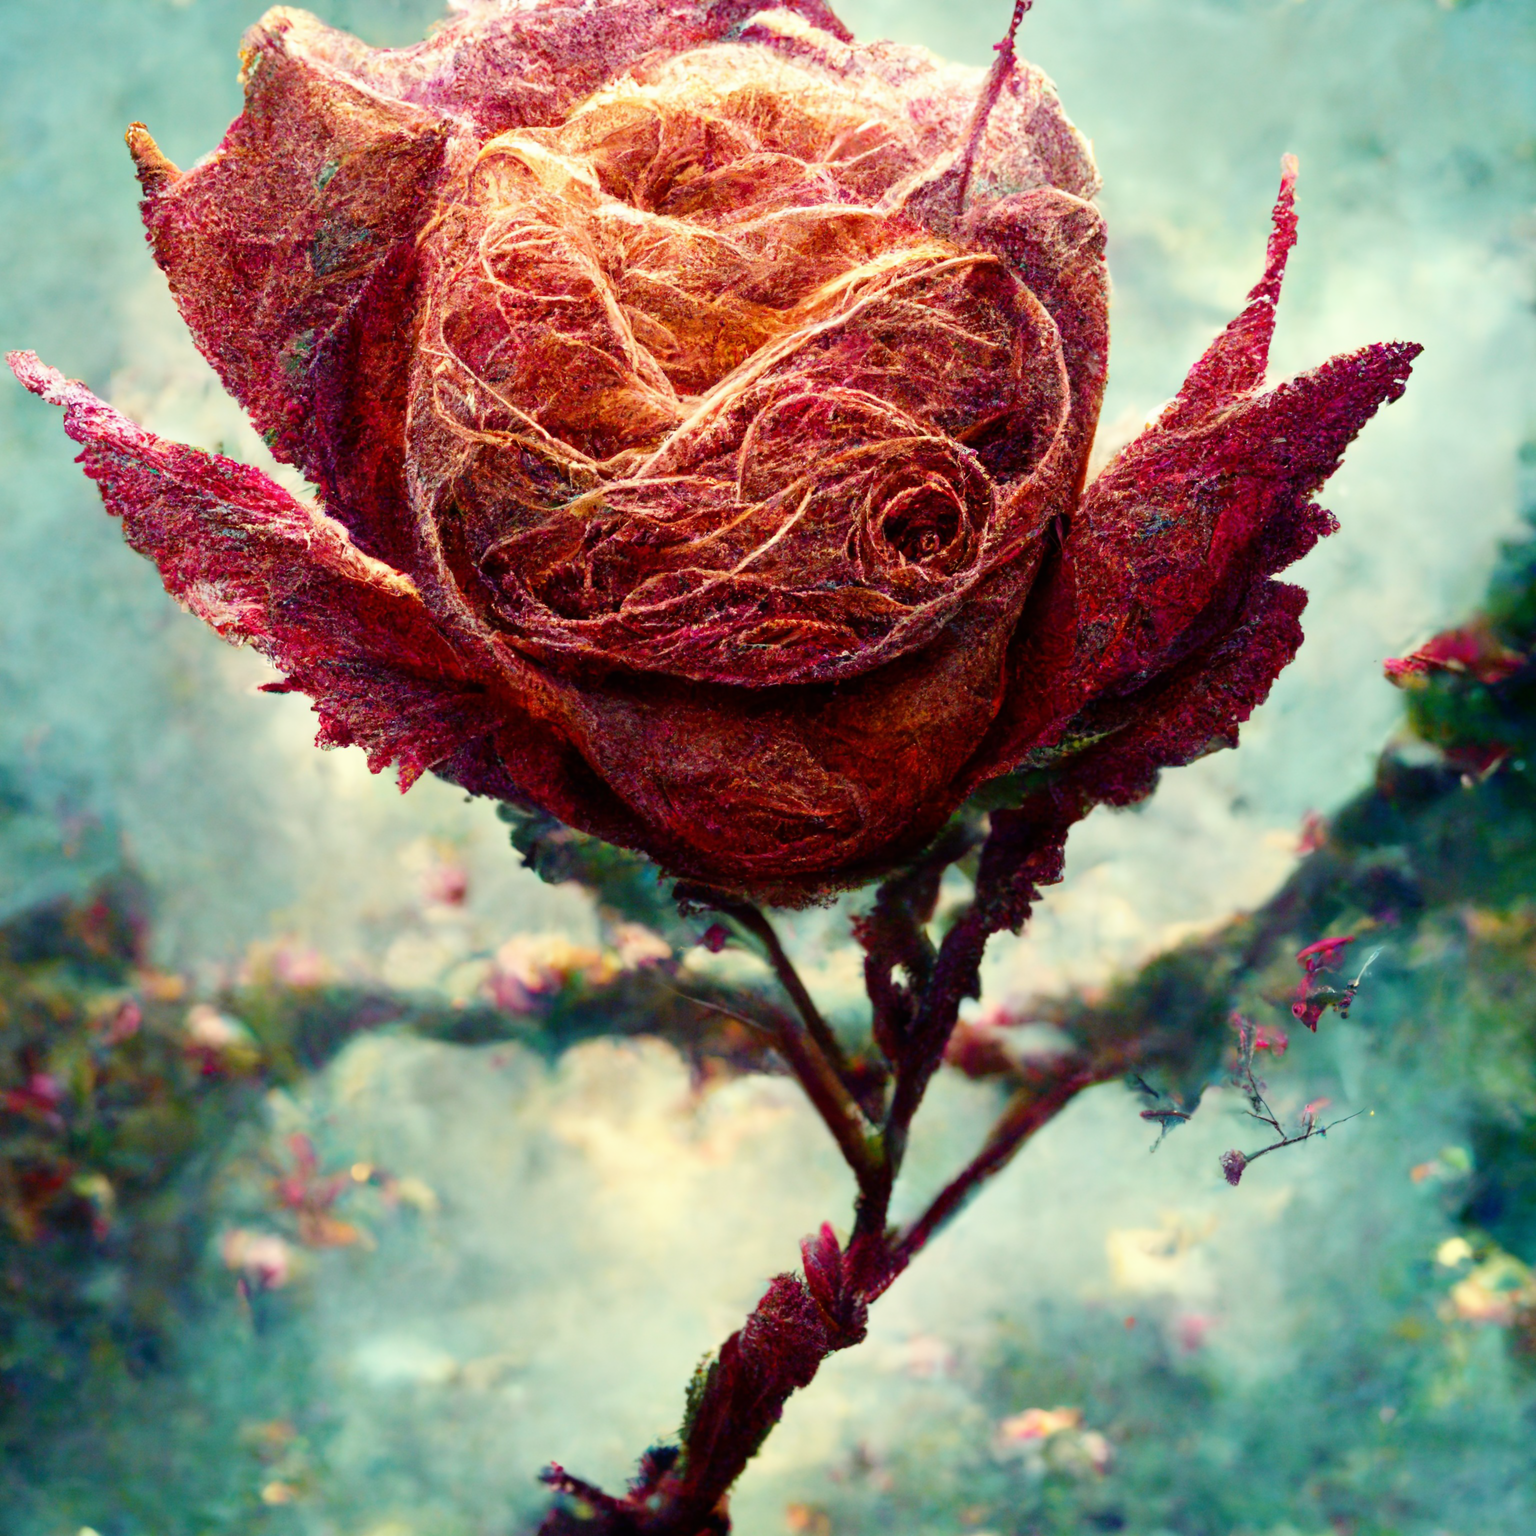 THE ROSE IS A MORNING BEAUTY by Luis Dato